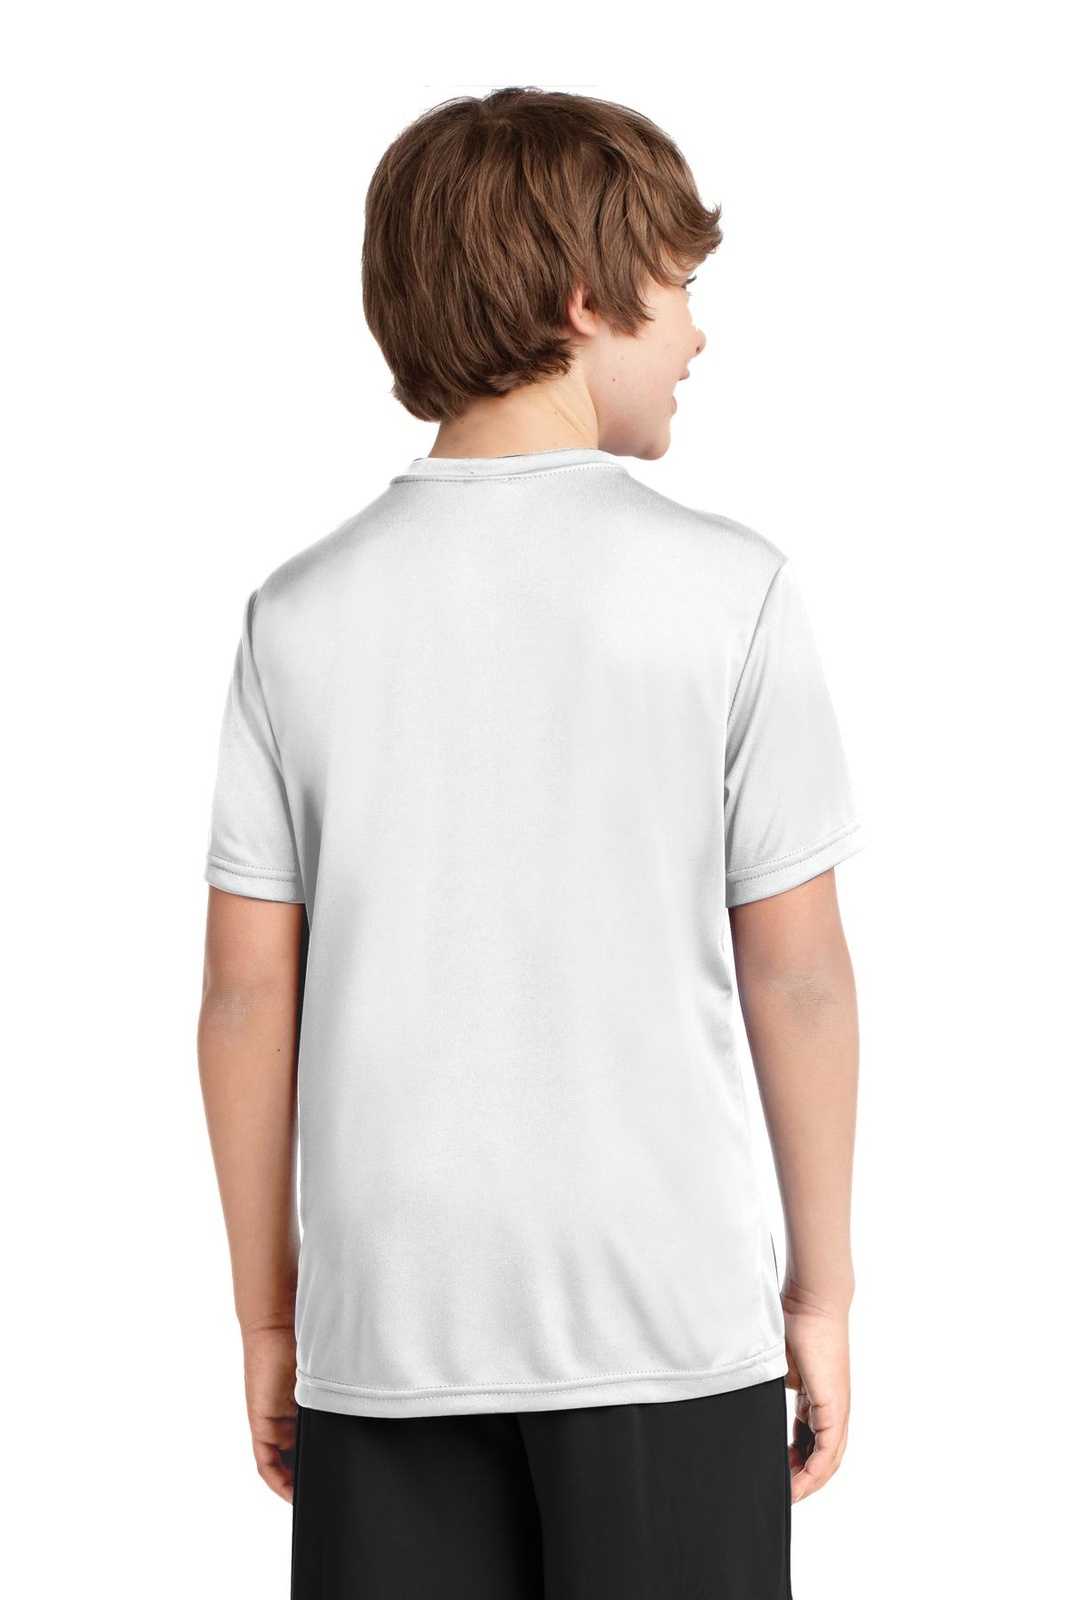 Port & Company PC380Y Youth Performance Tee - White - HIT a Double - 1